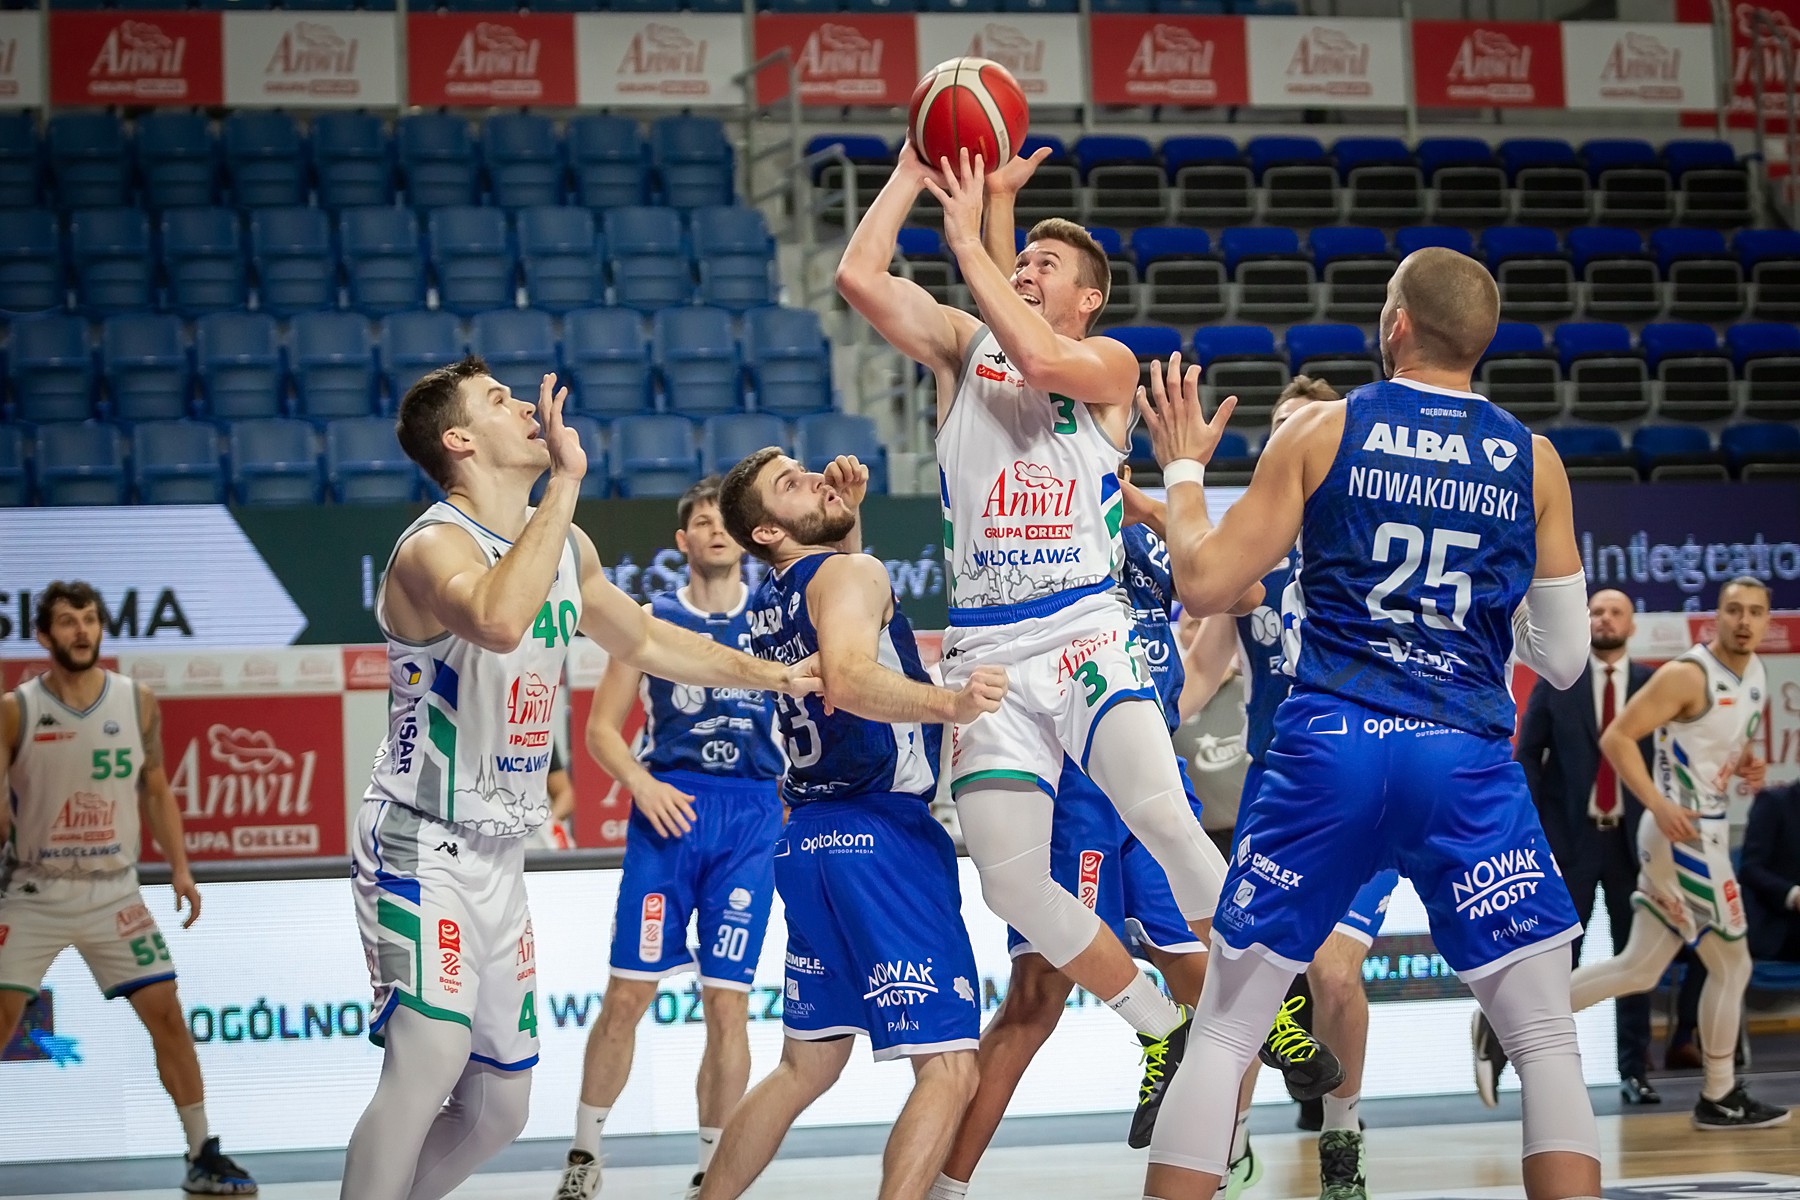 Ambitious Rivals Better Than Anwil